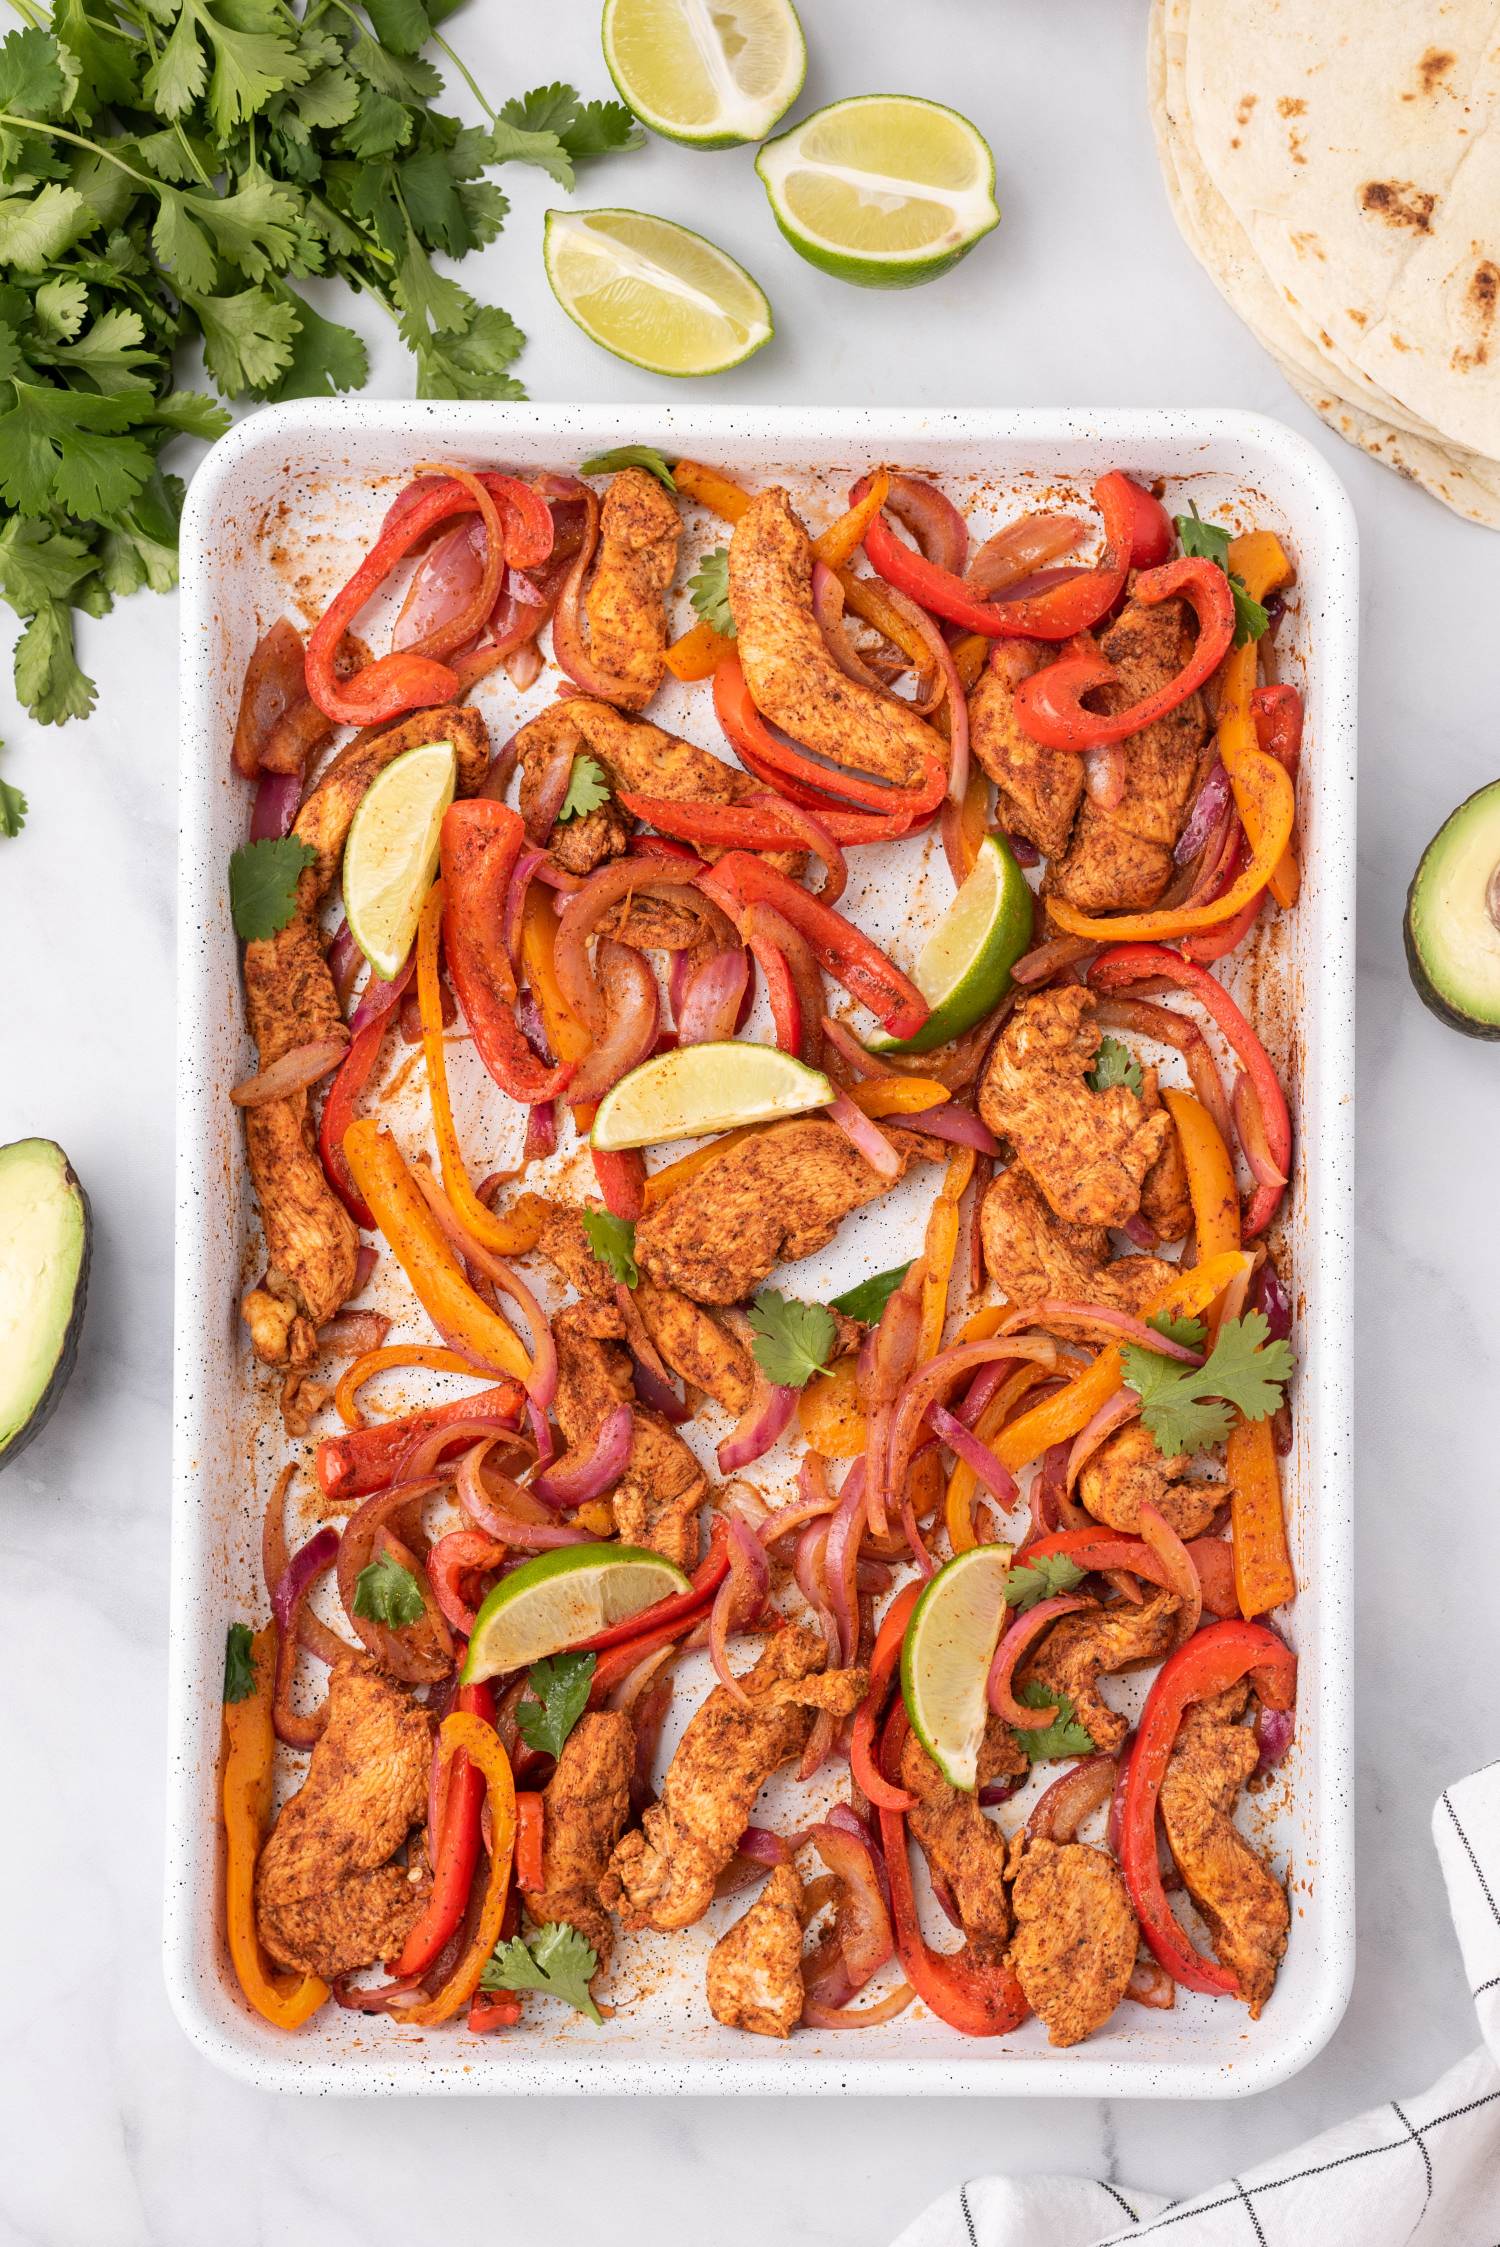 Sheet pan with fajita chicken, bell peppers, red onions, lime wedges, and fresh cilantro.